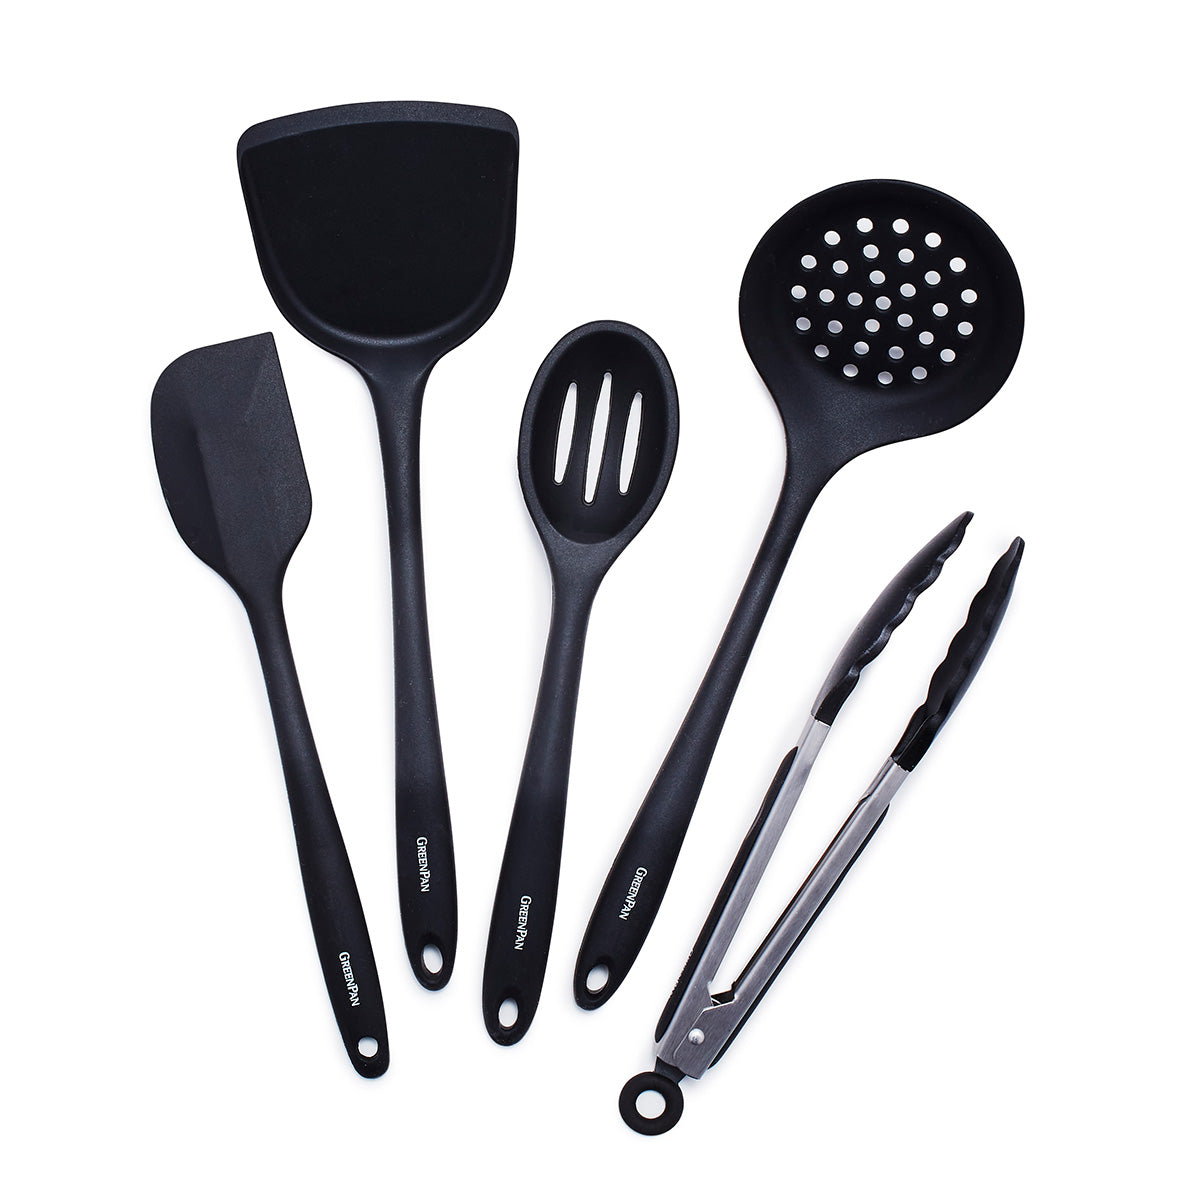 Healthy Non-Toxic PFAS Free Cookware - Platinum Silicone Tools 3-Piece Utensil Set by GreenPan